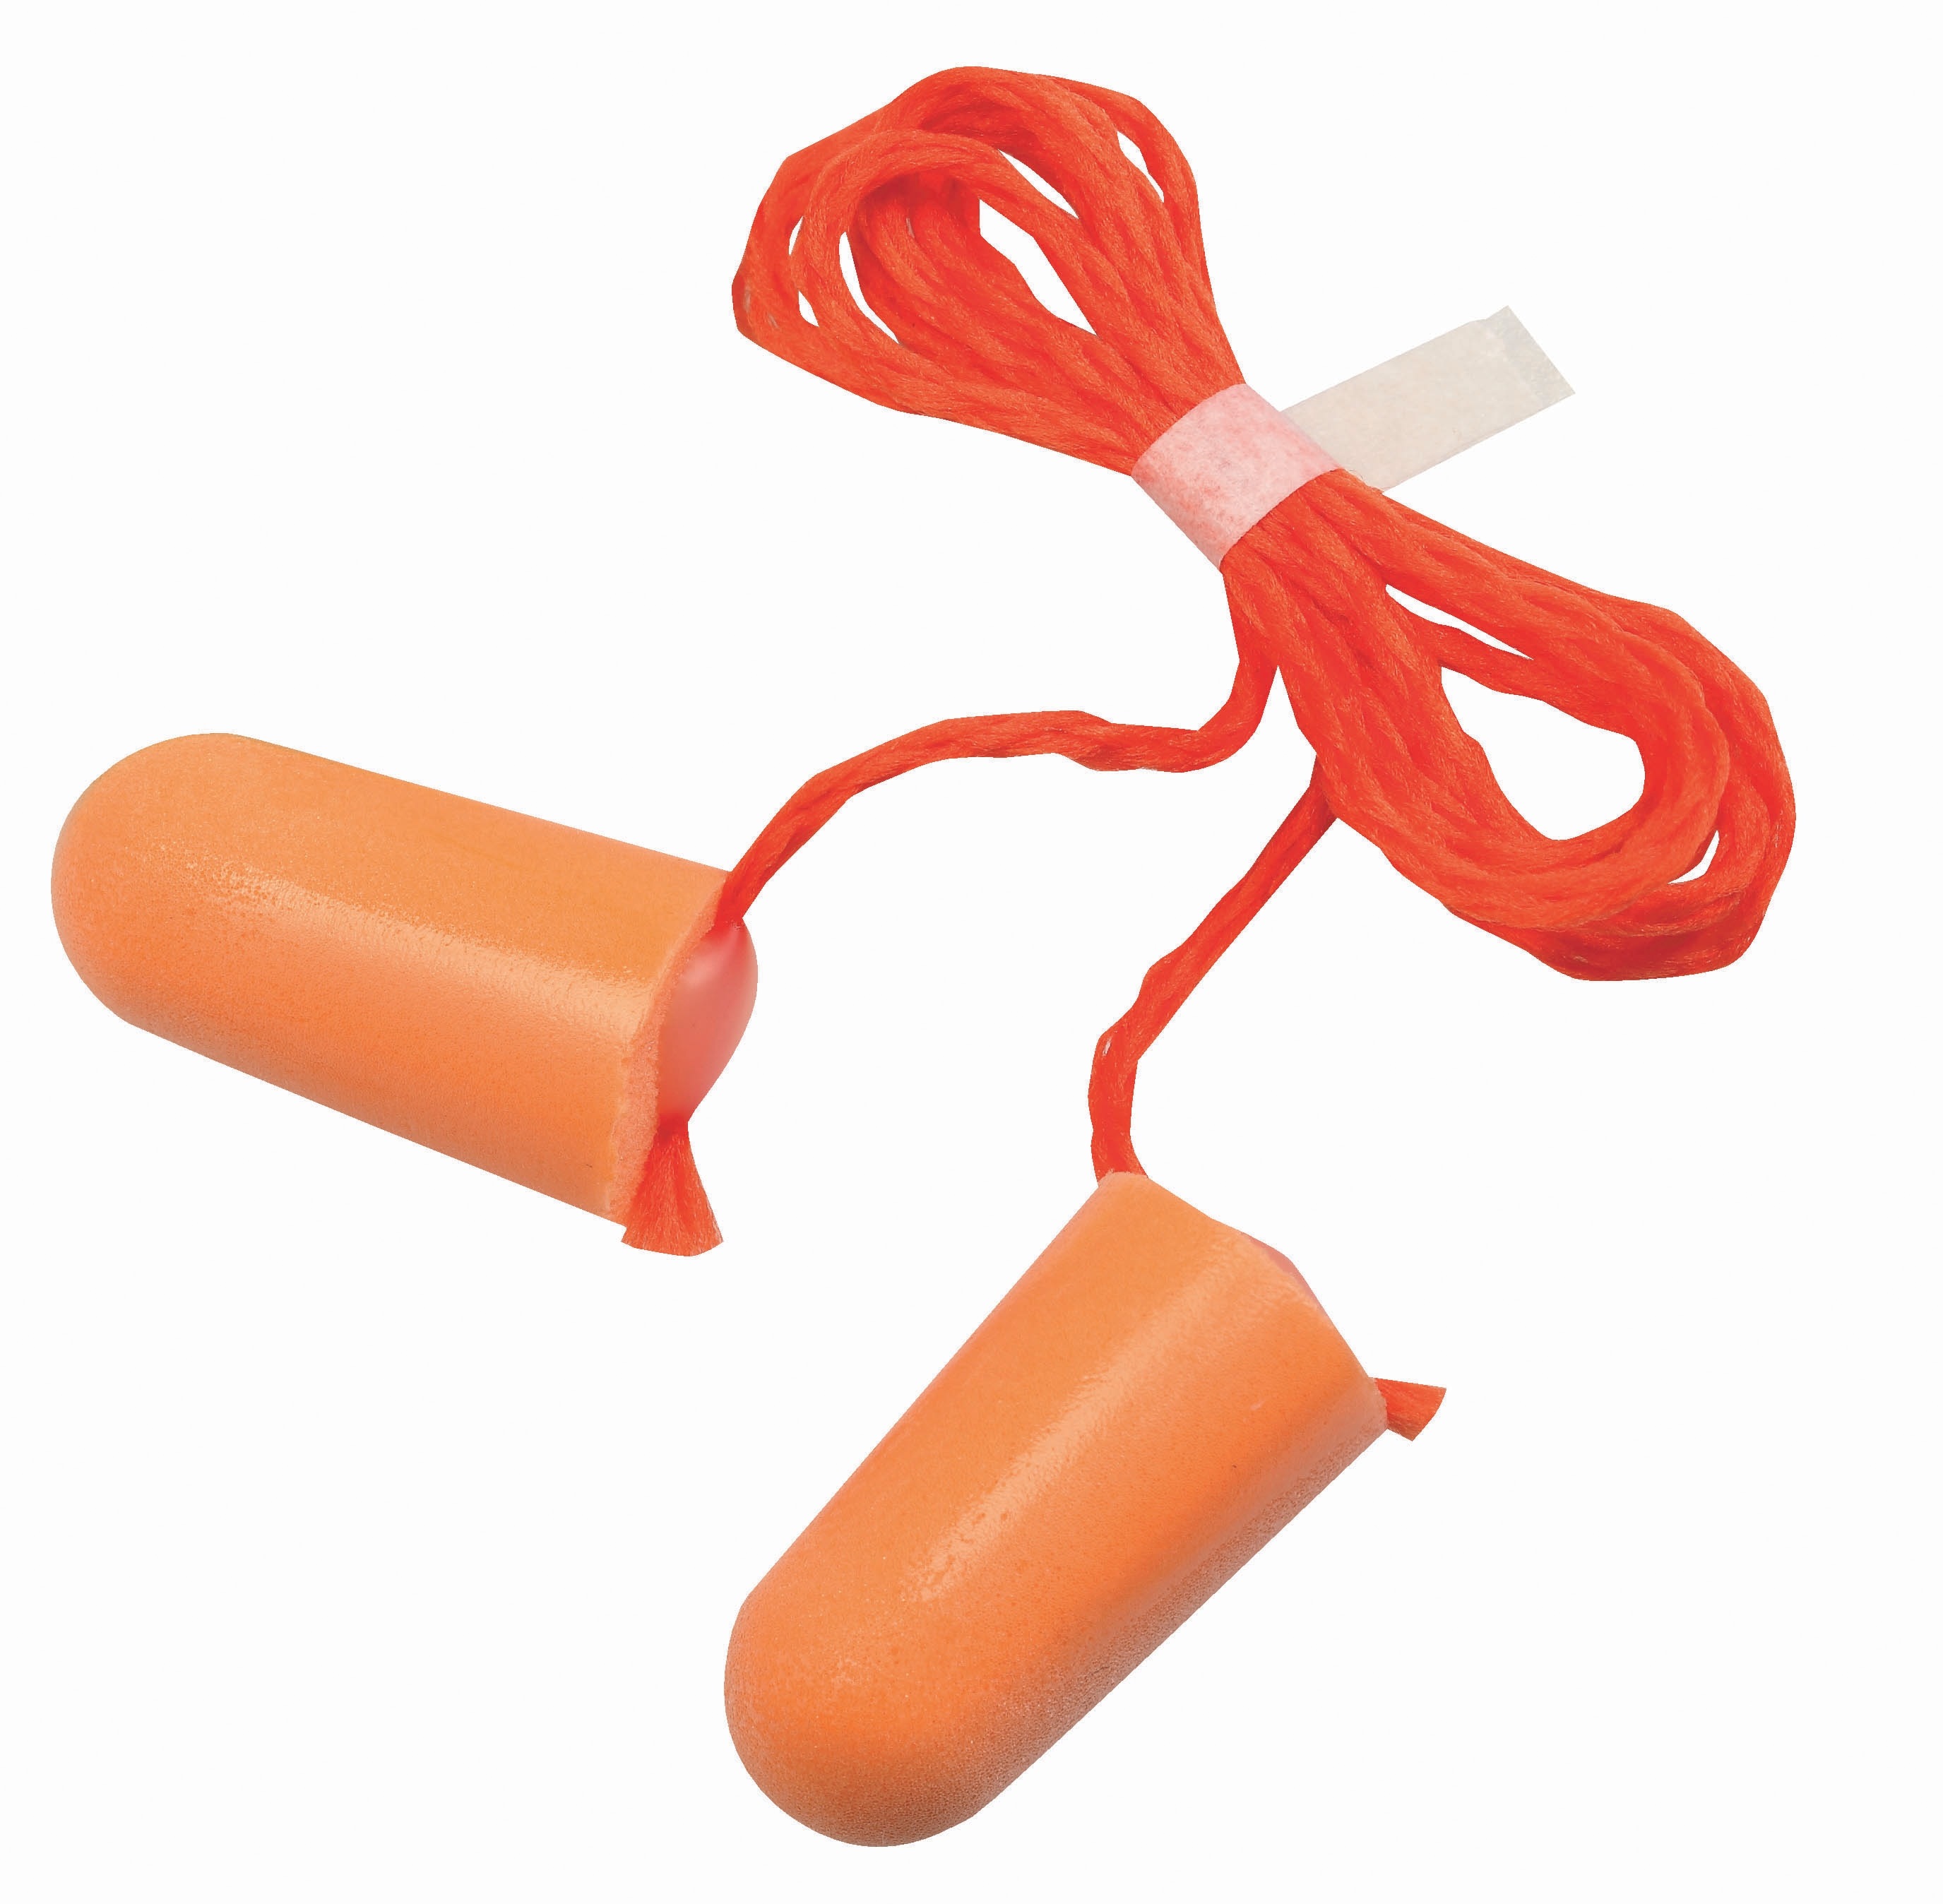 3M CORDED EAR PLUG - 1110 (1PR / PACK), Hearing Protection